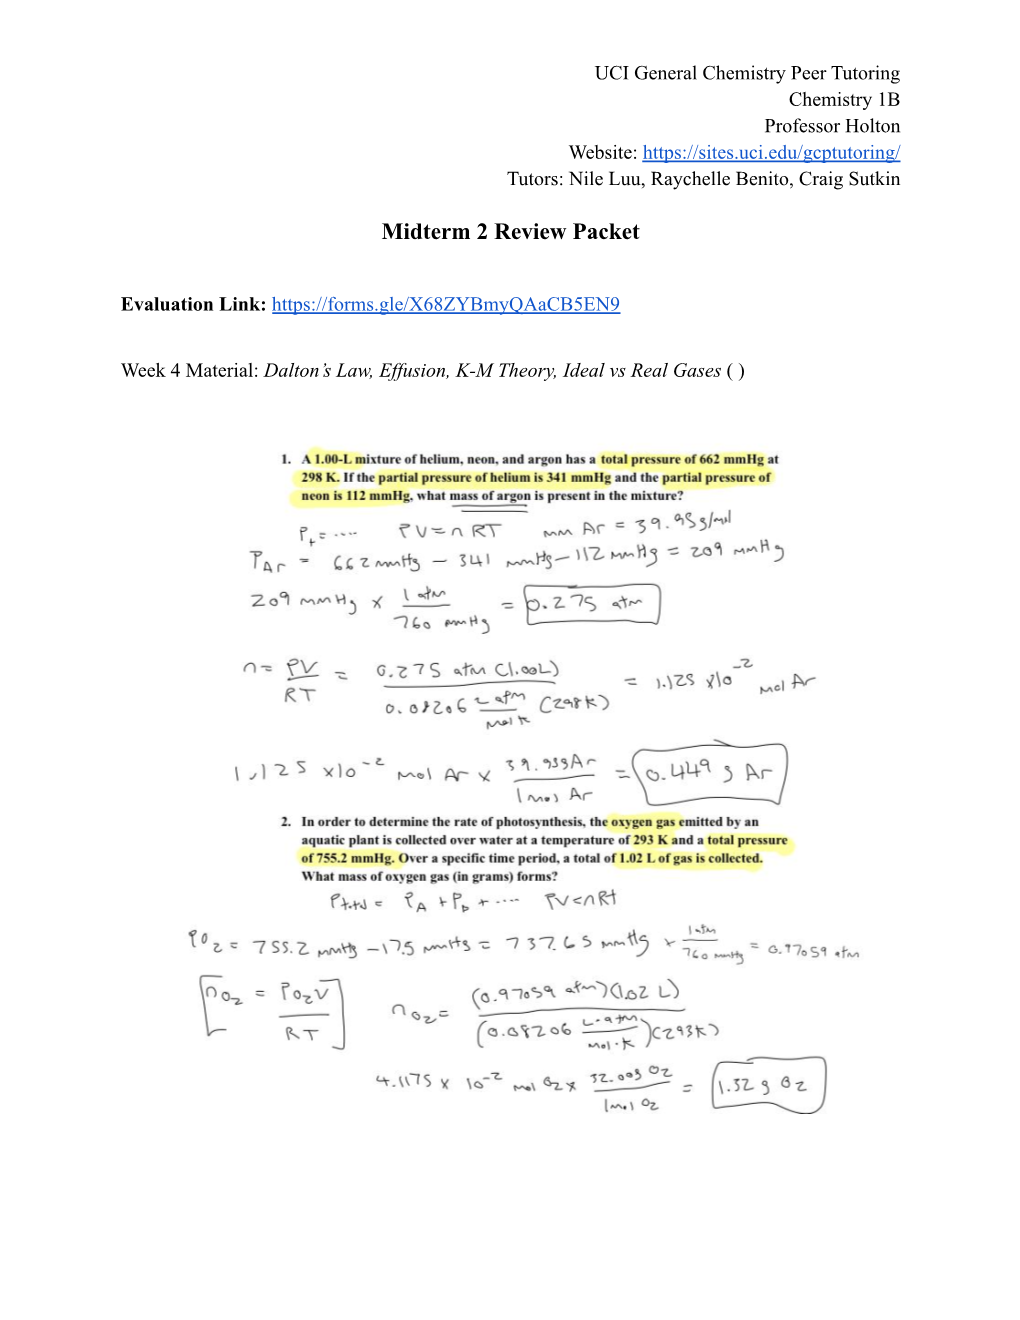 KEY S21 Holton Chem 1B Midterm 2 Review Packet